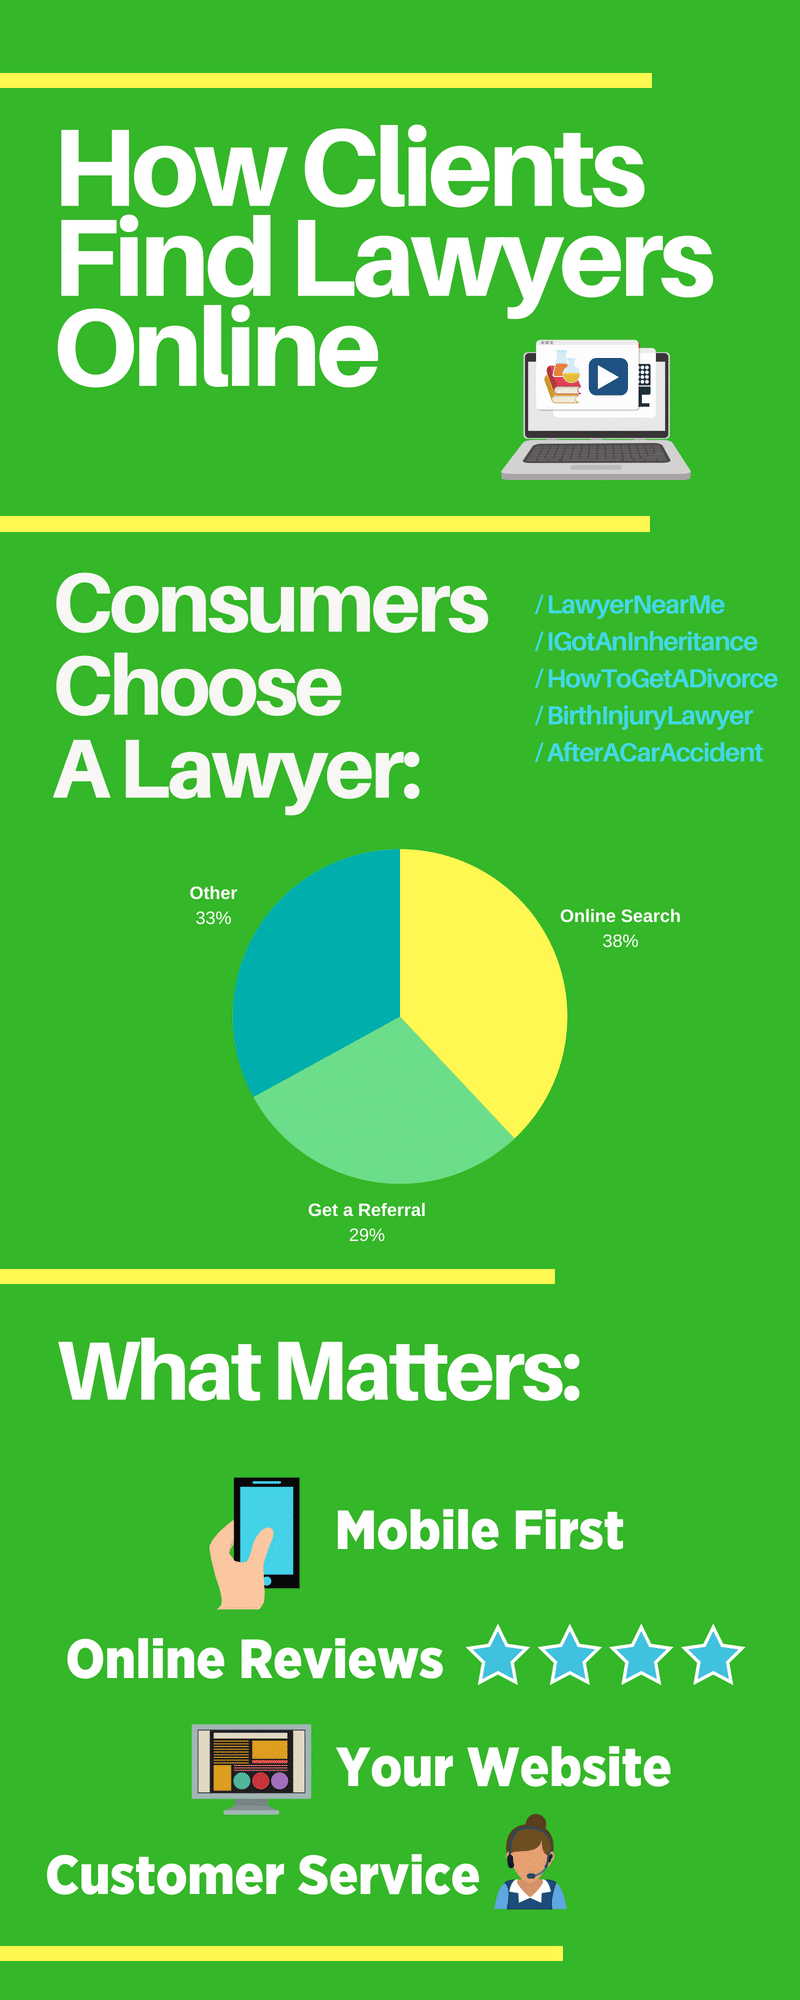 How consumers find lawyers